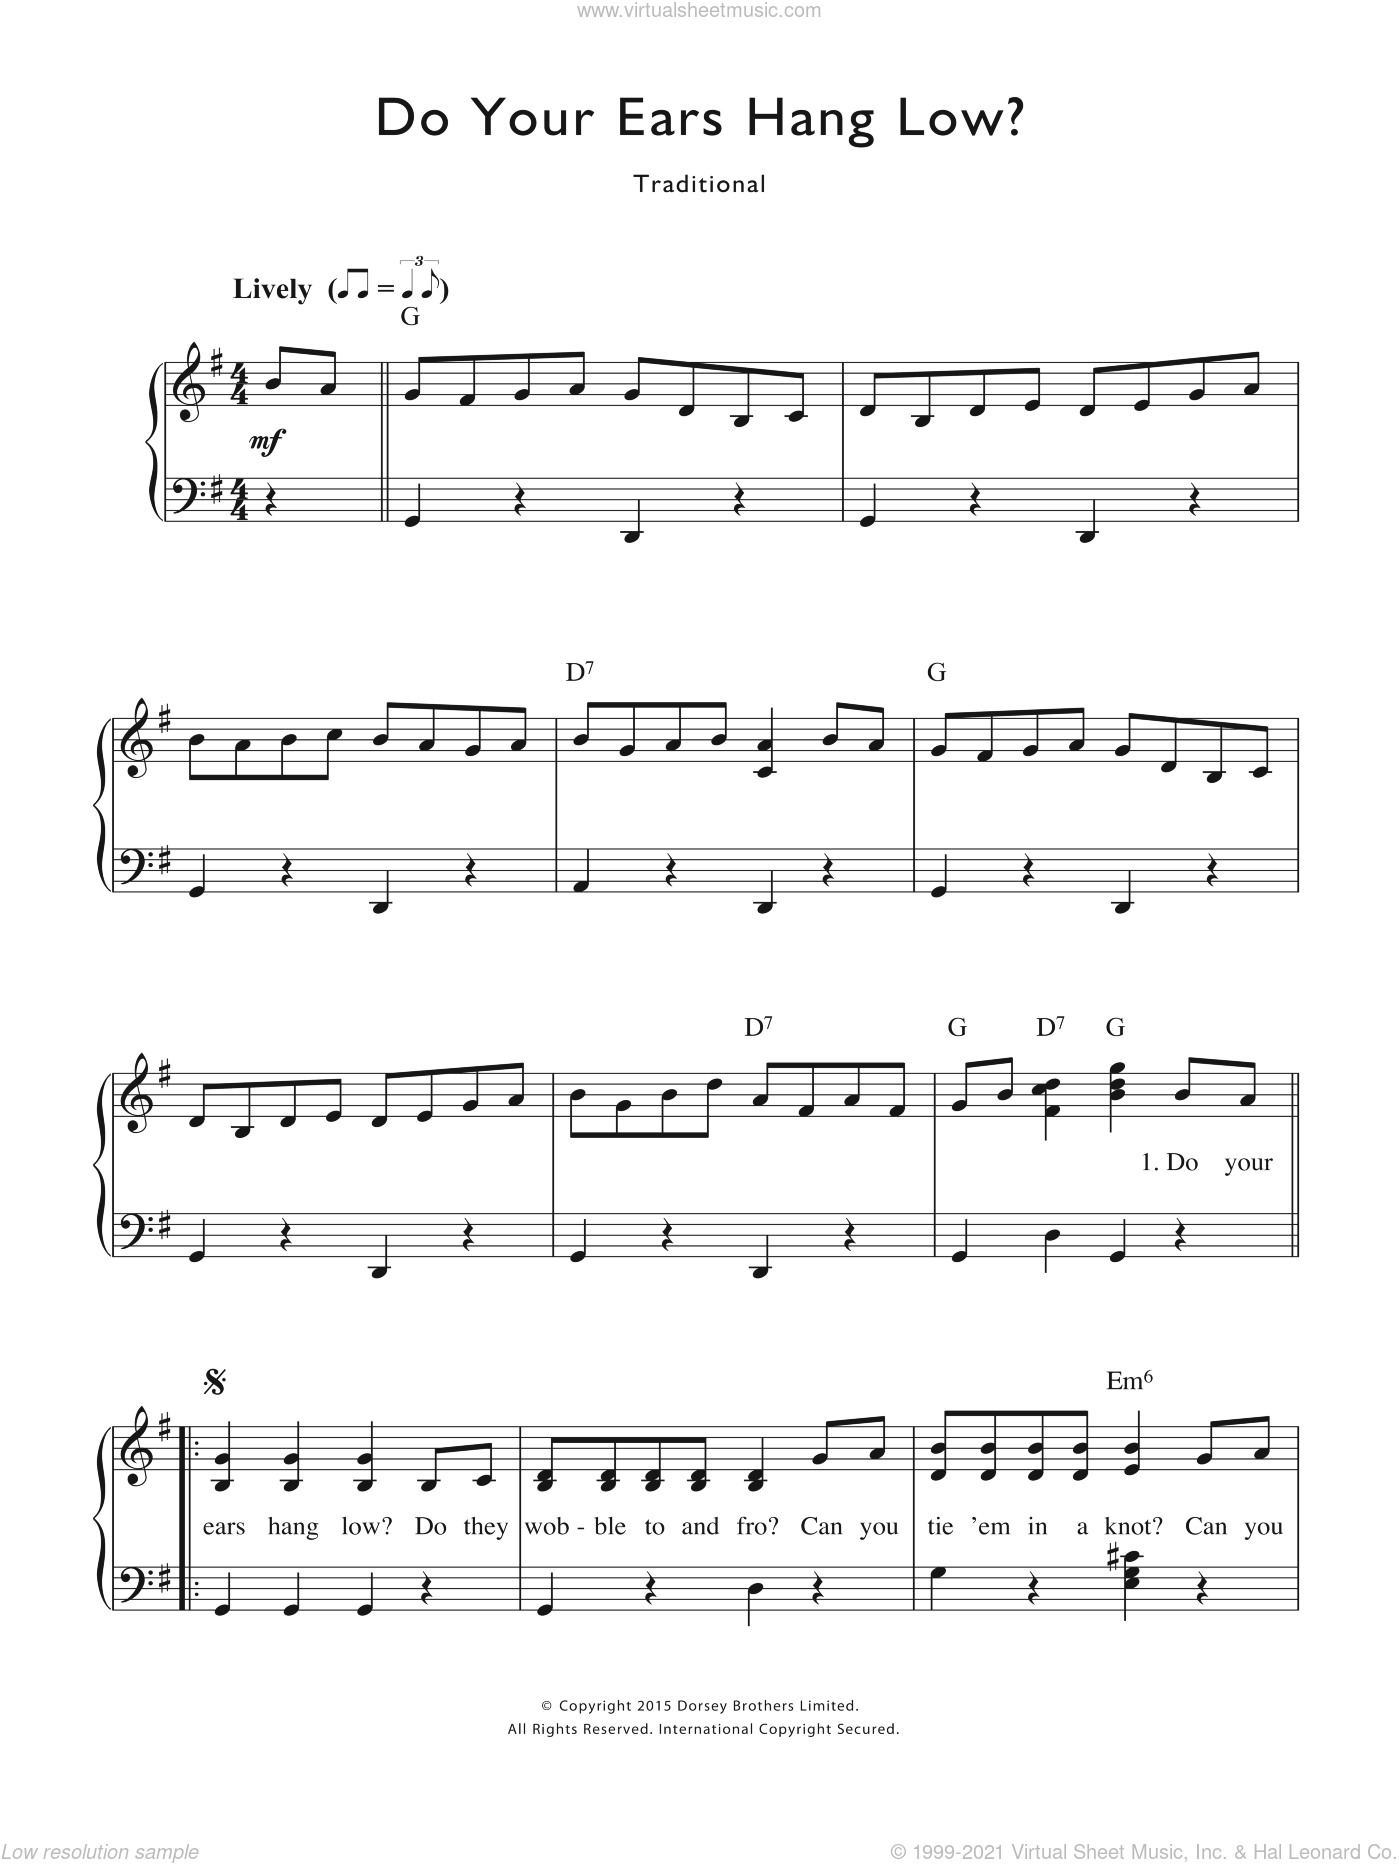 Rhyme - Do Your Ears Hang Low sheet music for voice and piano